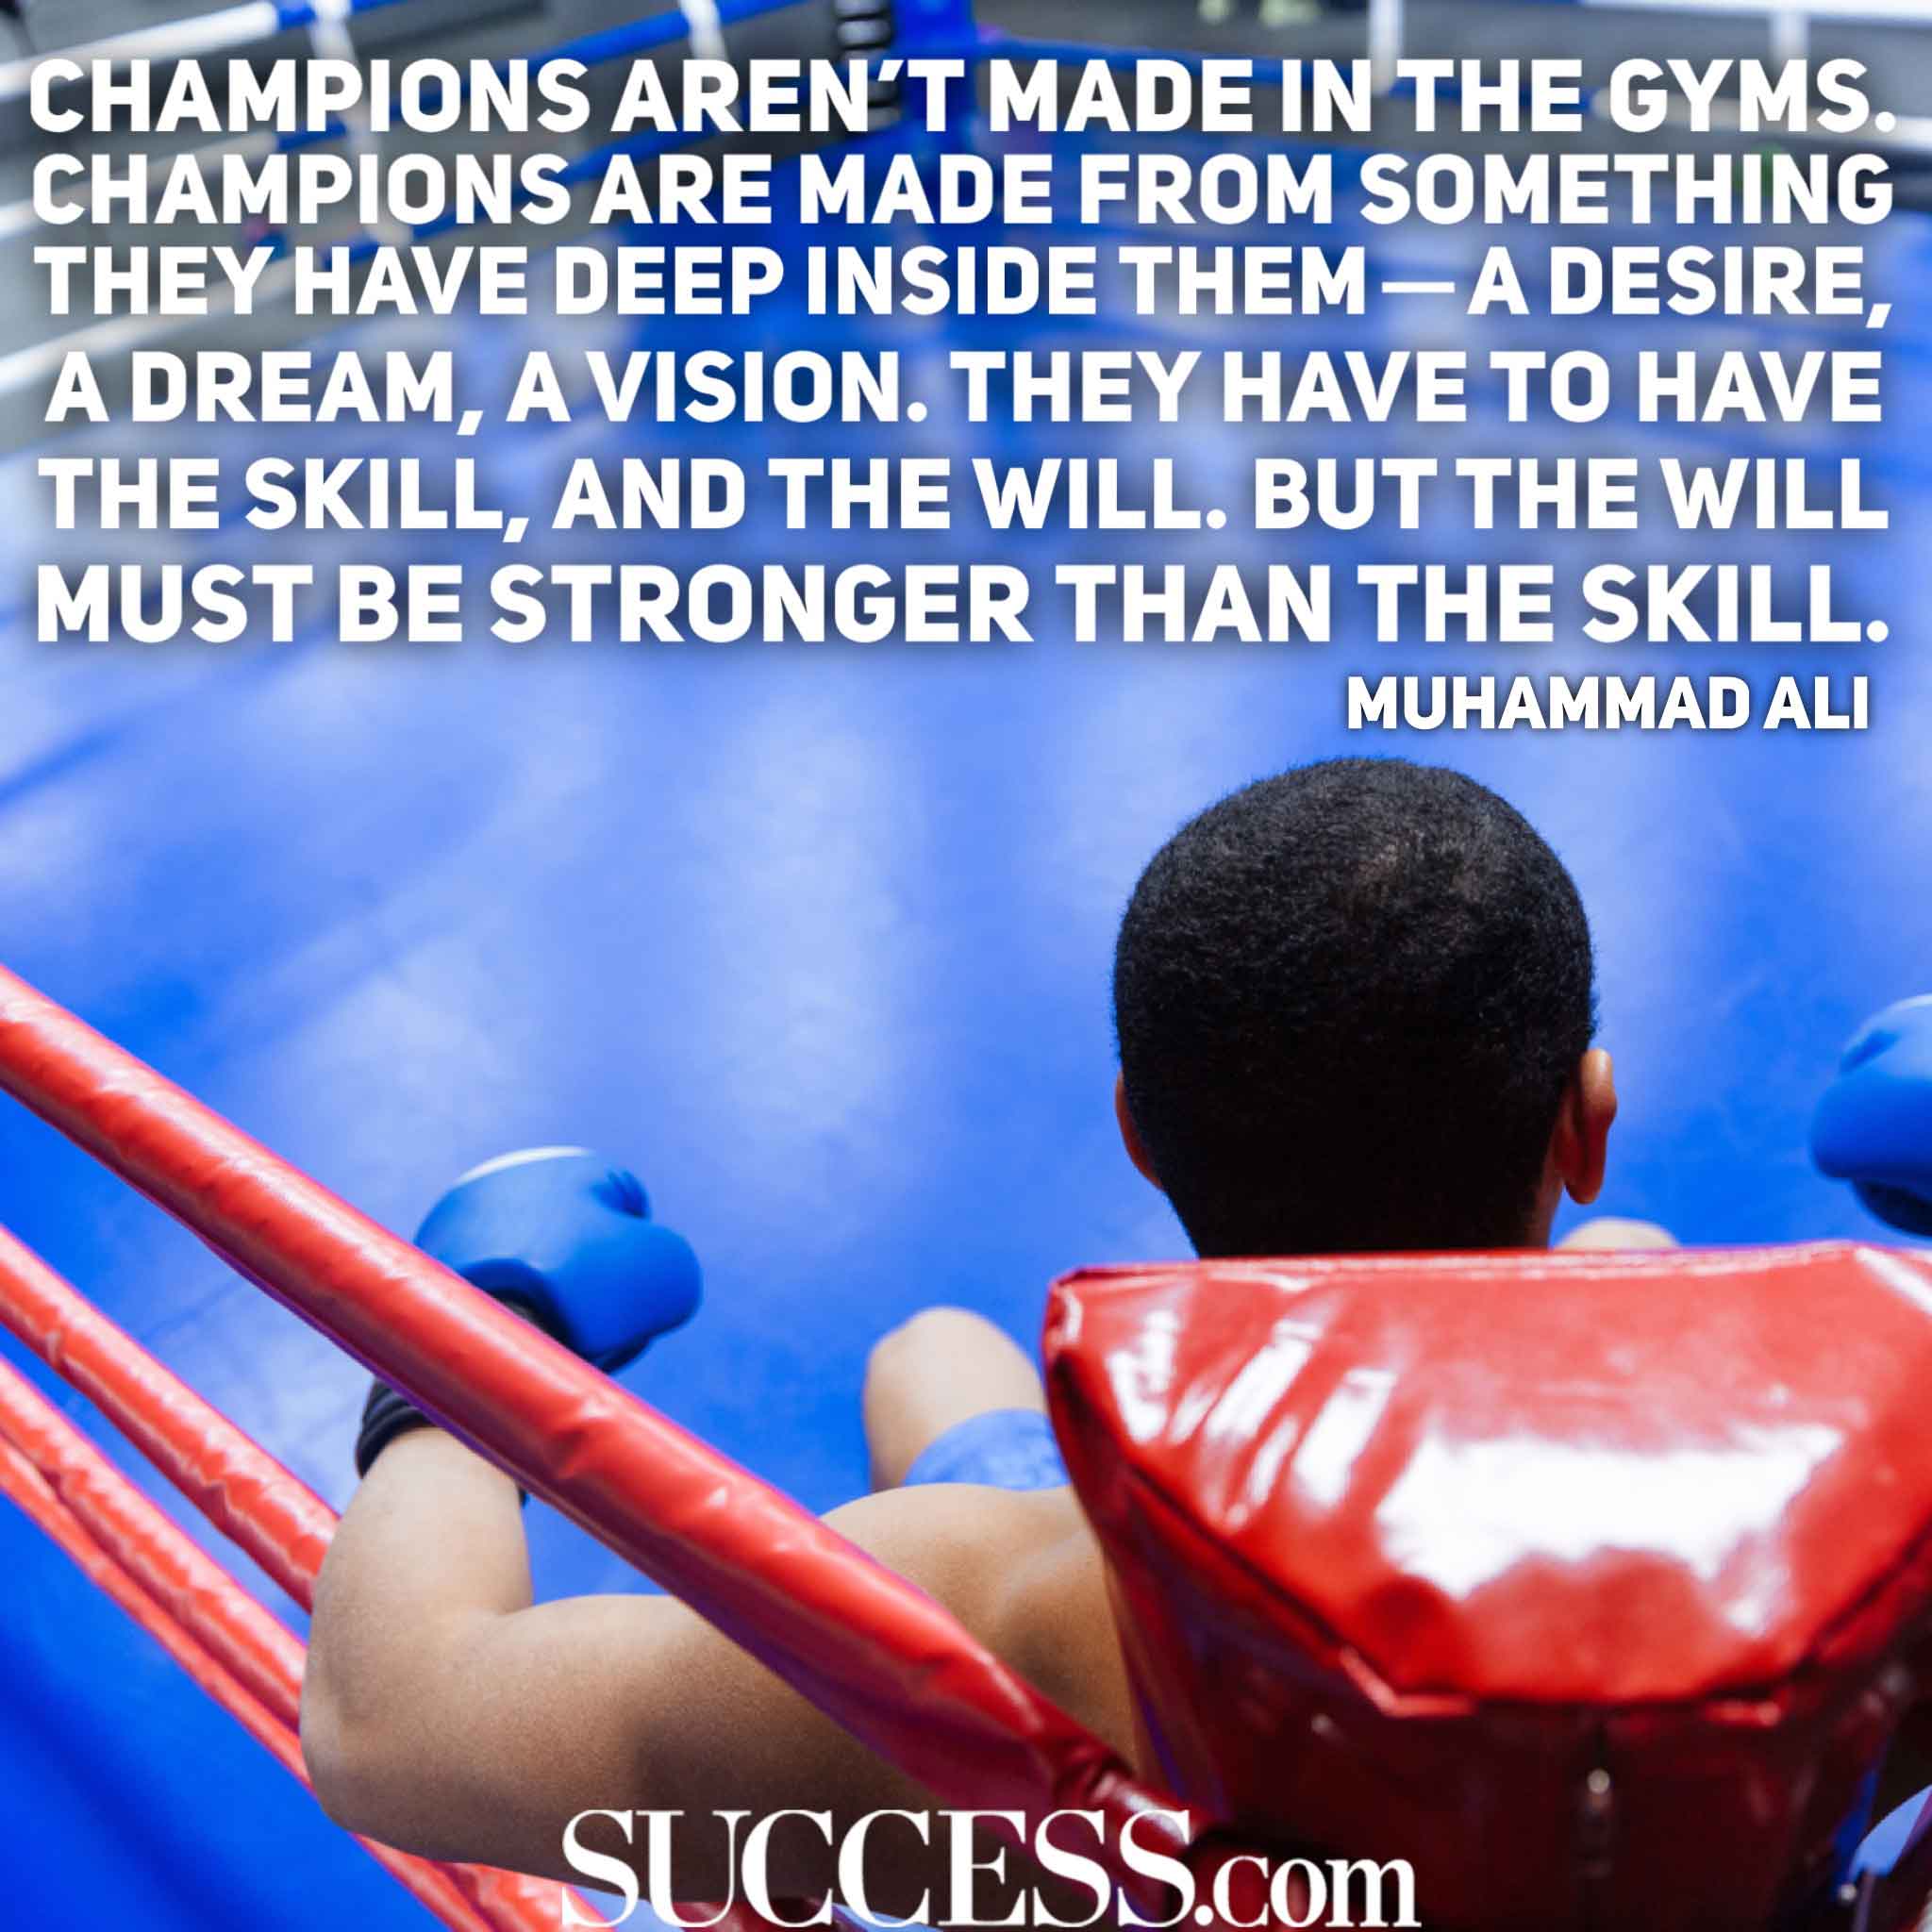 Muhammad Ali Quote: “Champions have to have the skill and the will. But the  will must